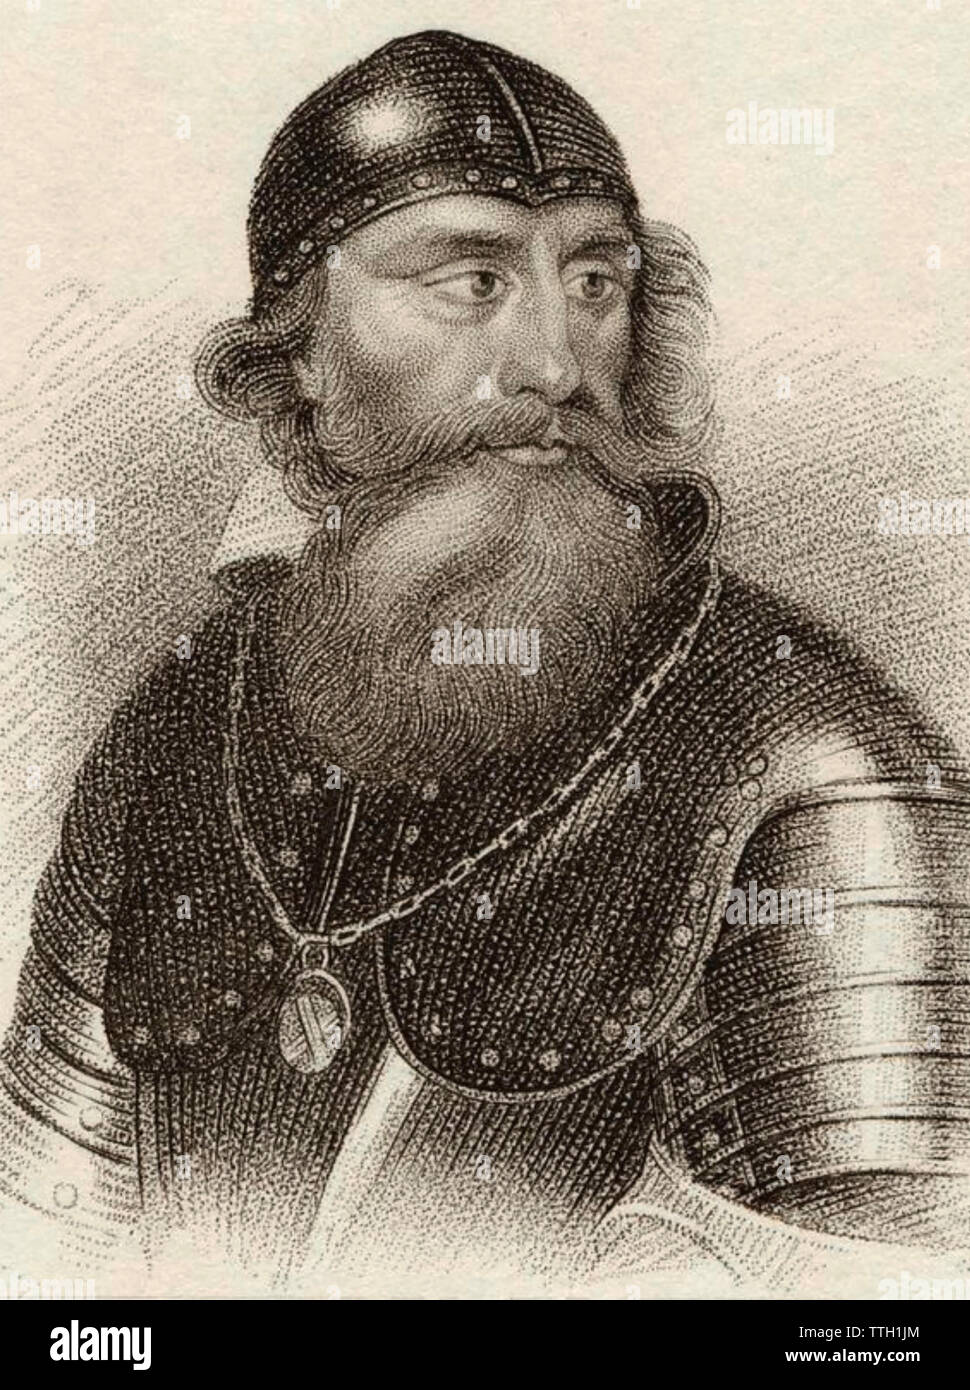 ROBERT THE BRUCE (1274-1329) first King of Scotland in an 18th century engraving Stock Photo